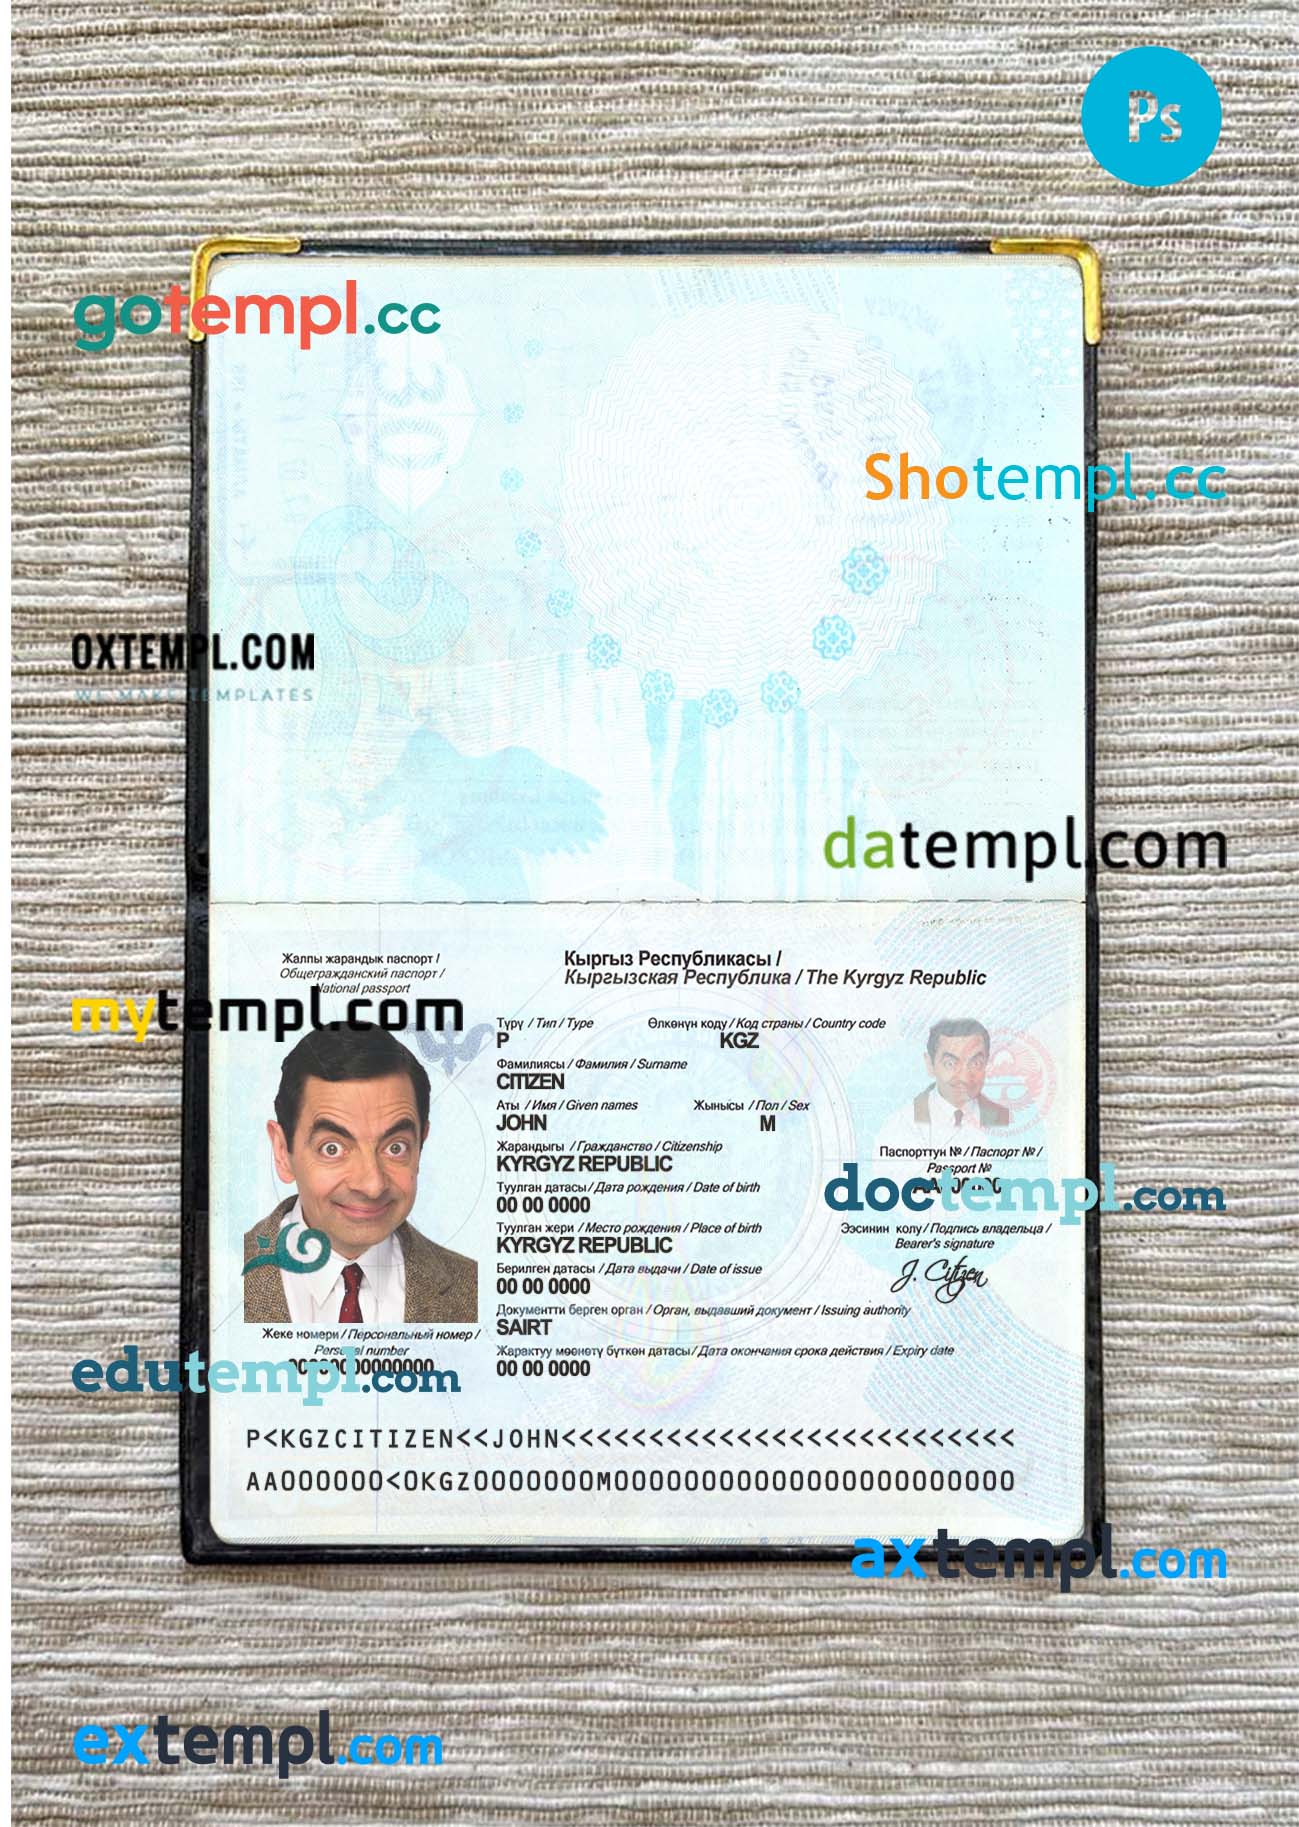 USA Colorado ID card PSD files, scan look and photographed image, 2 in 1, under 21